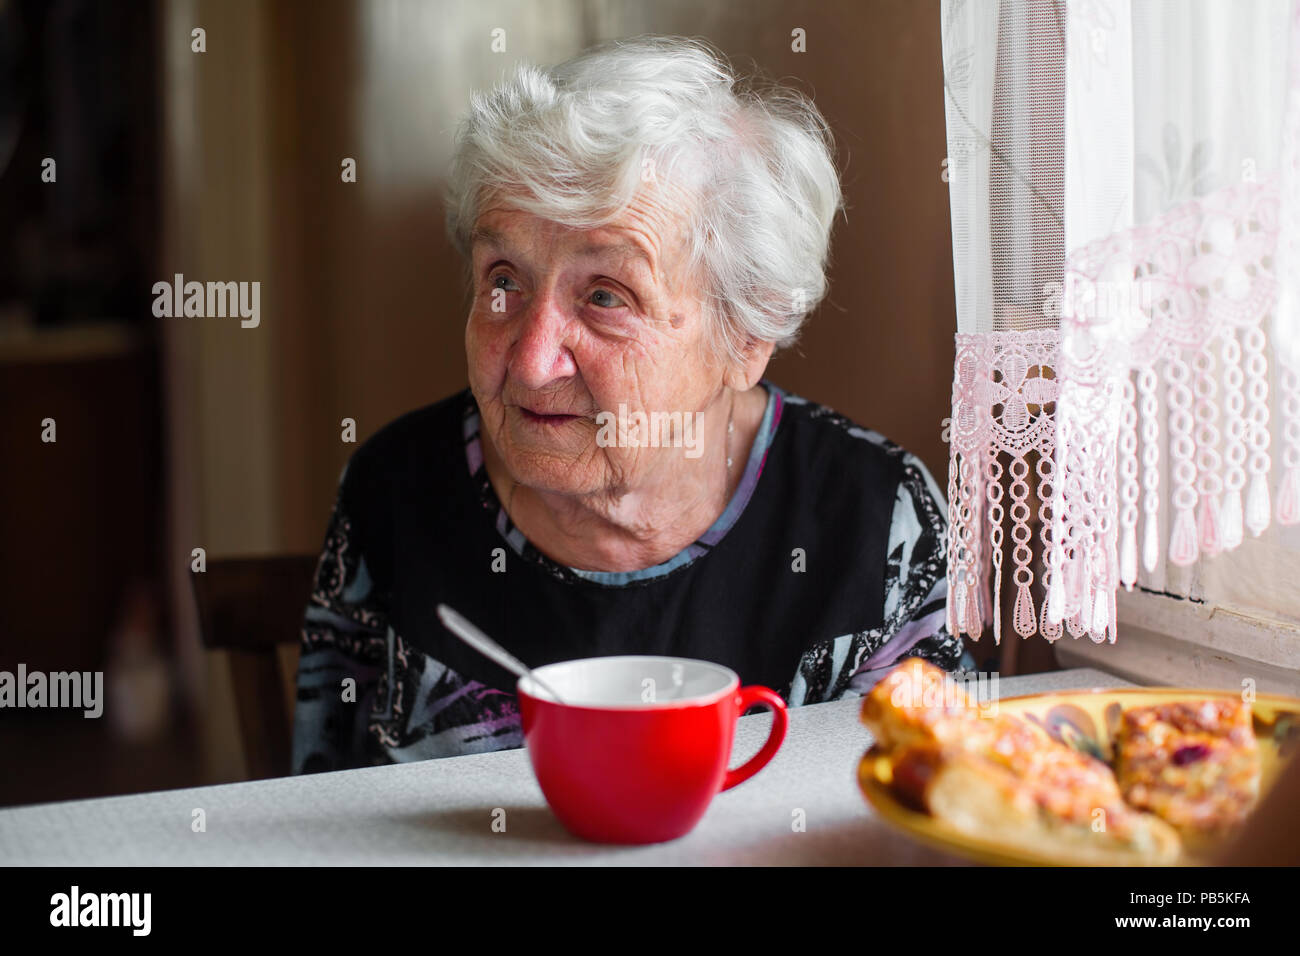 Old lady is sitting at the kitchen table. Stock Photo